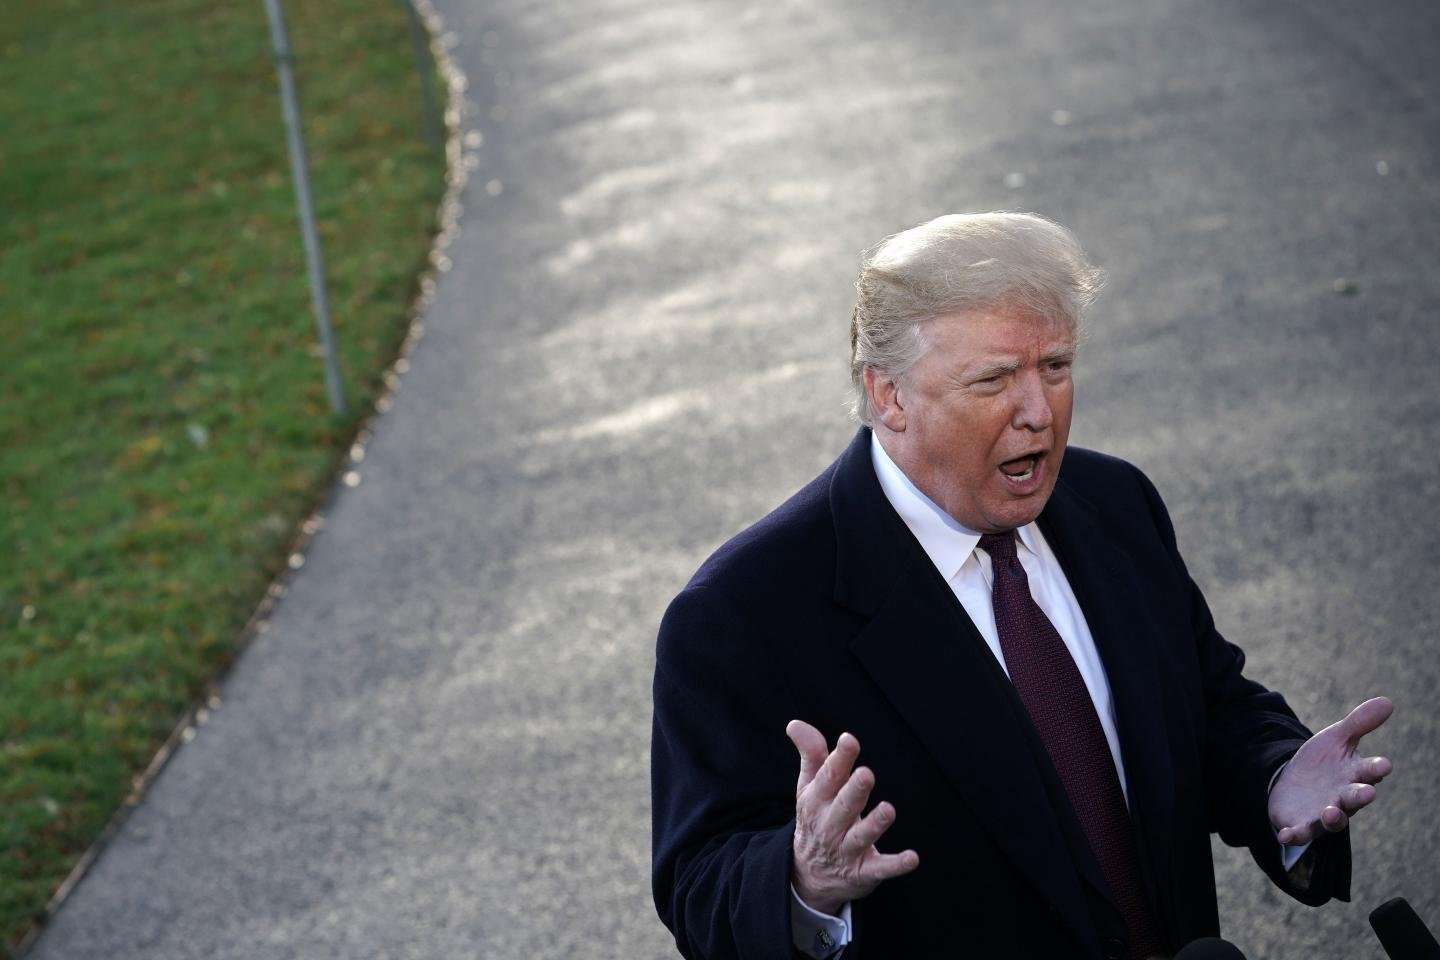 image for Donald Trump's Disapproval Rating Hits All-time High, Rising After Midterm Election, Poll Shows